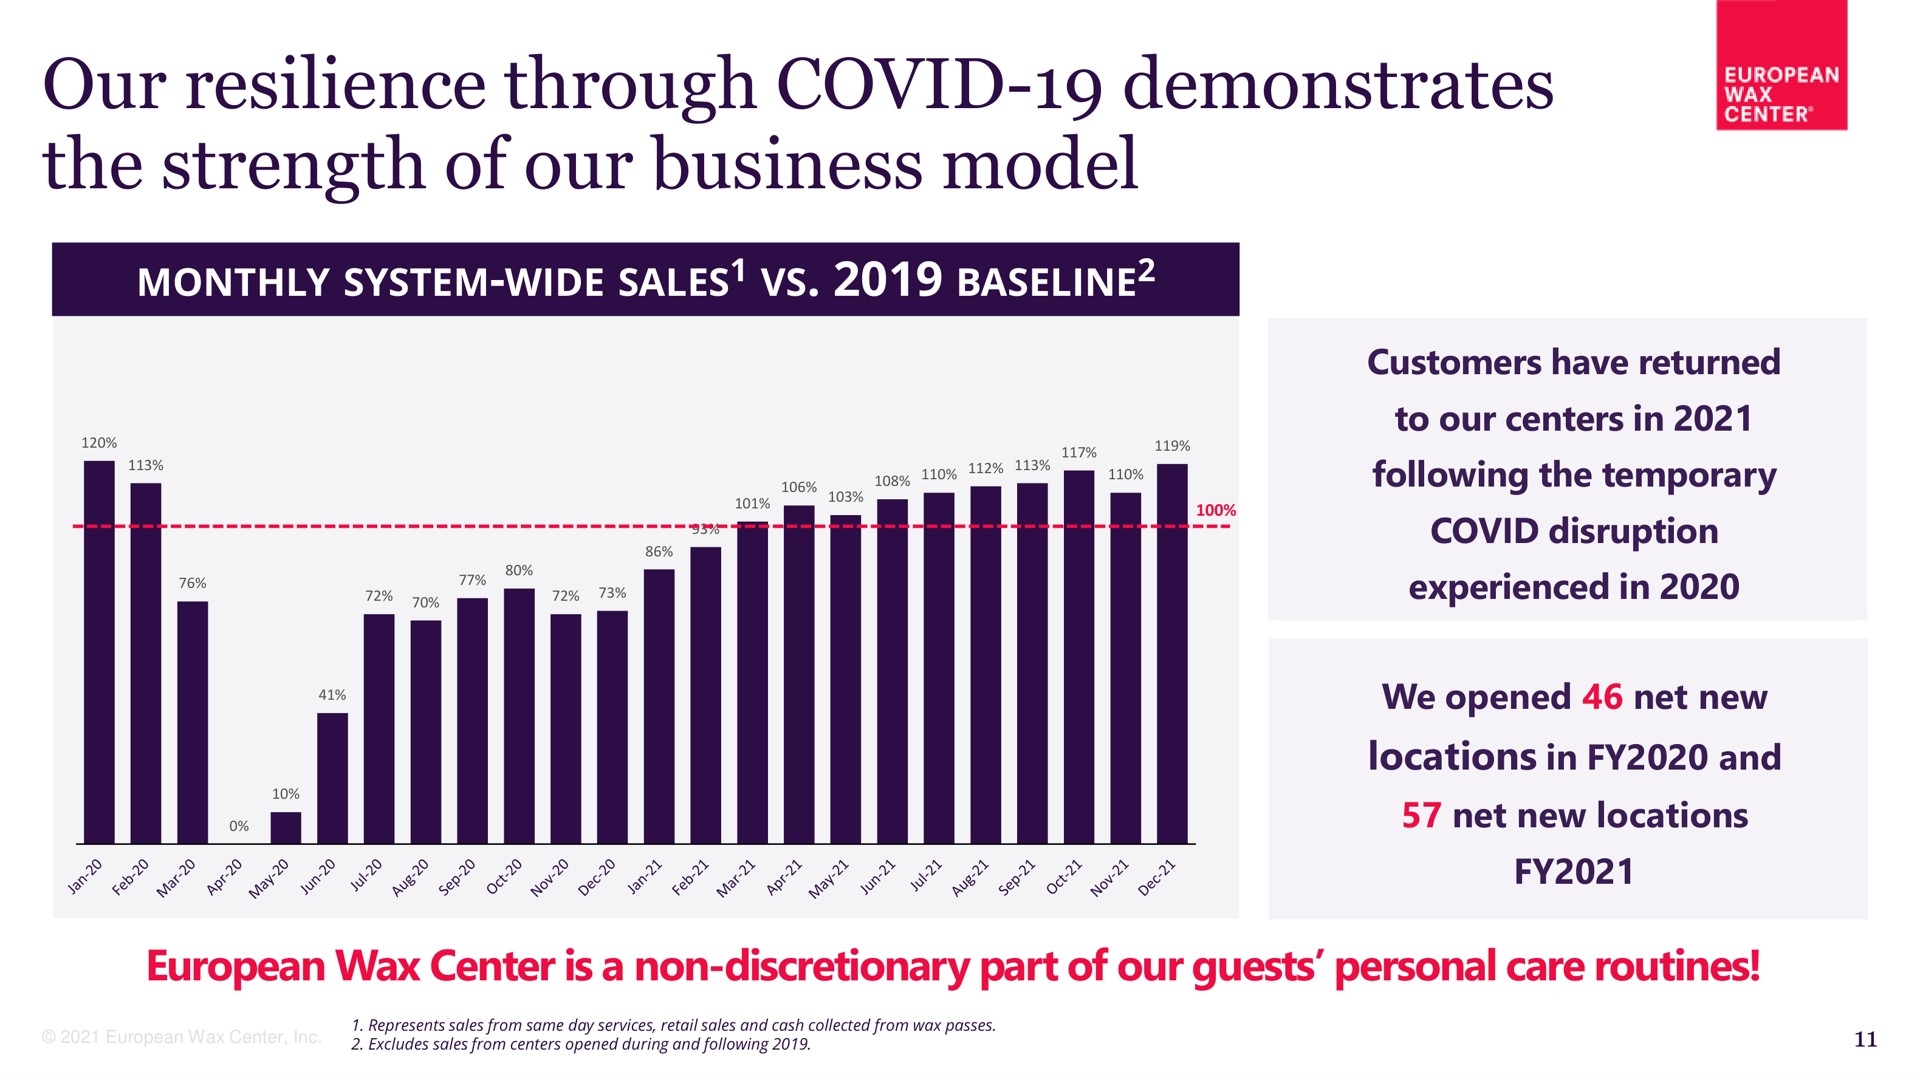 our resilience through covid demonstrates the strength of our business model | European Wax Center